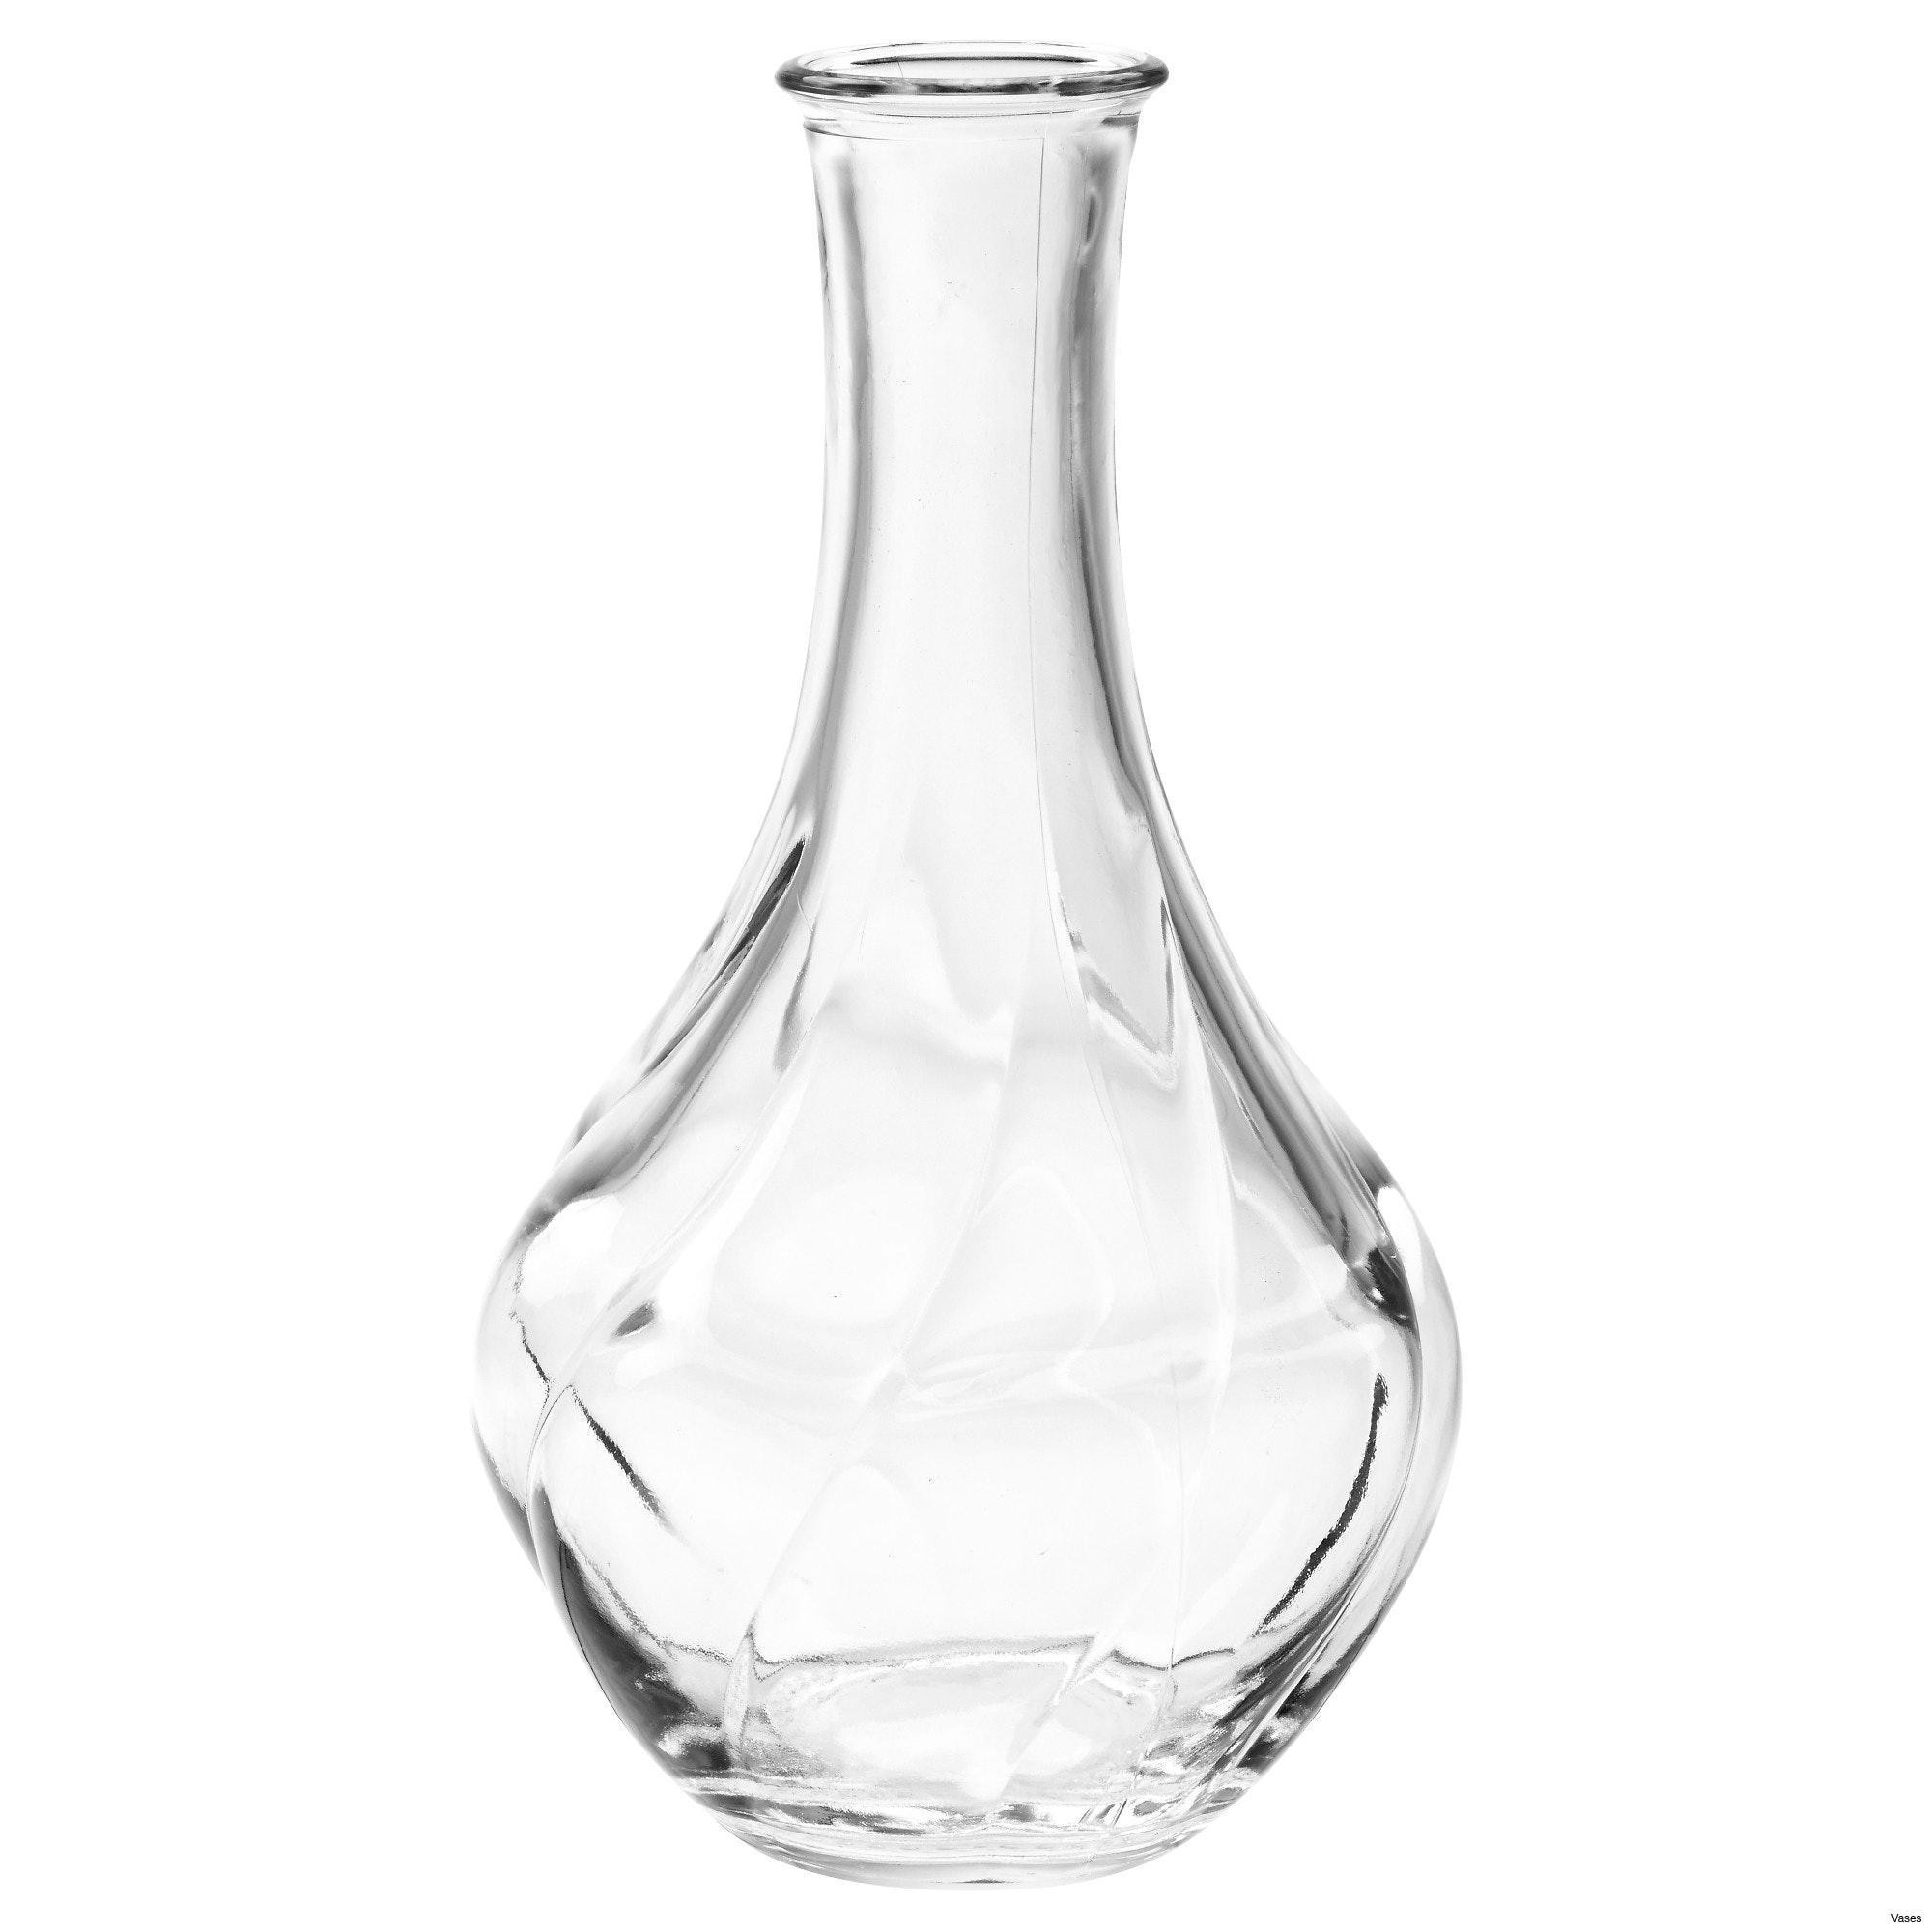 23 Stylish Tall Bud Vase 2024 free download tall bud vase of heavy glass vase gallery living room glass vases fresh clear vase 0d in heavy glass vase gallery living room glass vases fresh clear vase 0d tags amazing and of